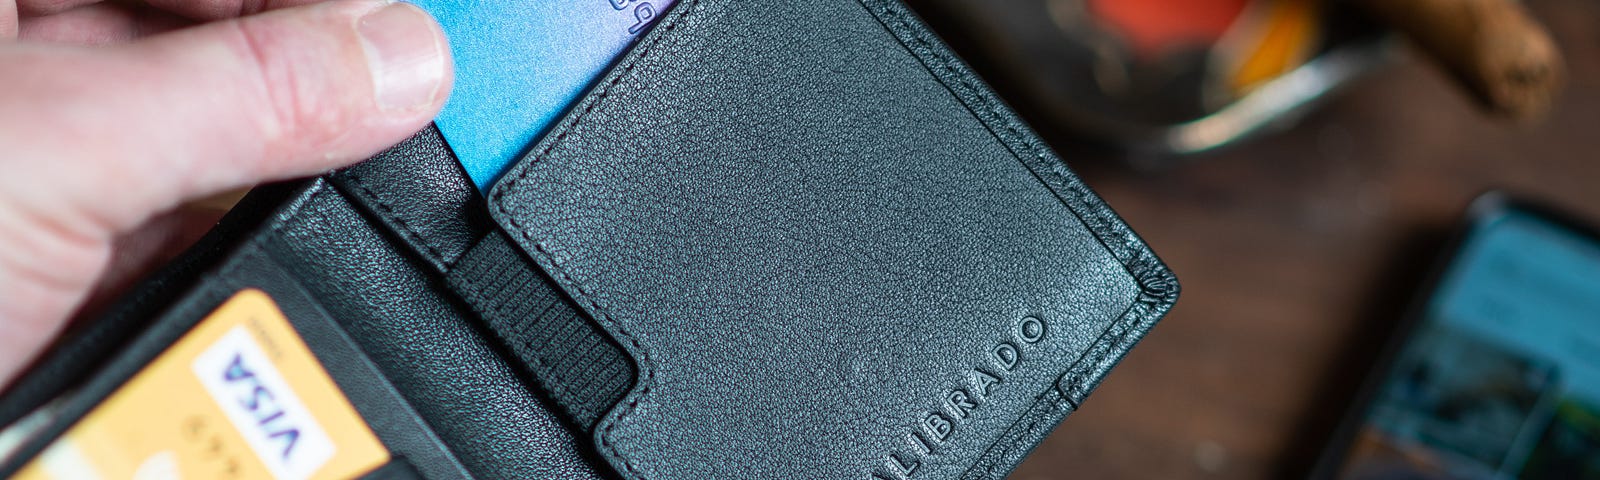 Image of credit cards inside of a wallet.